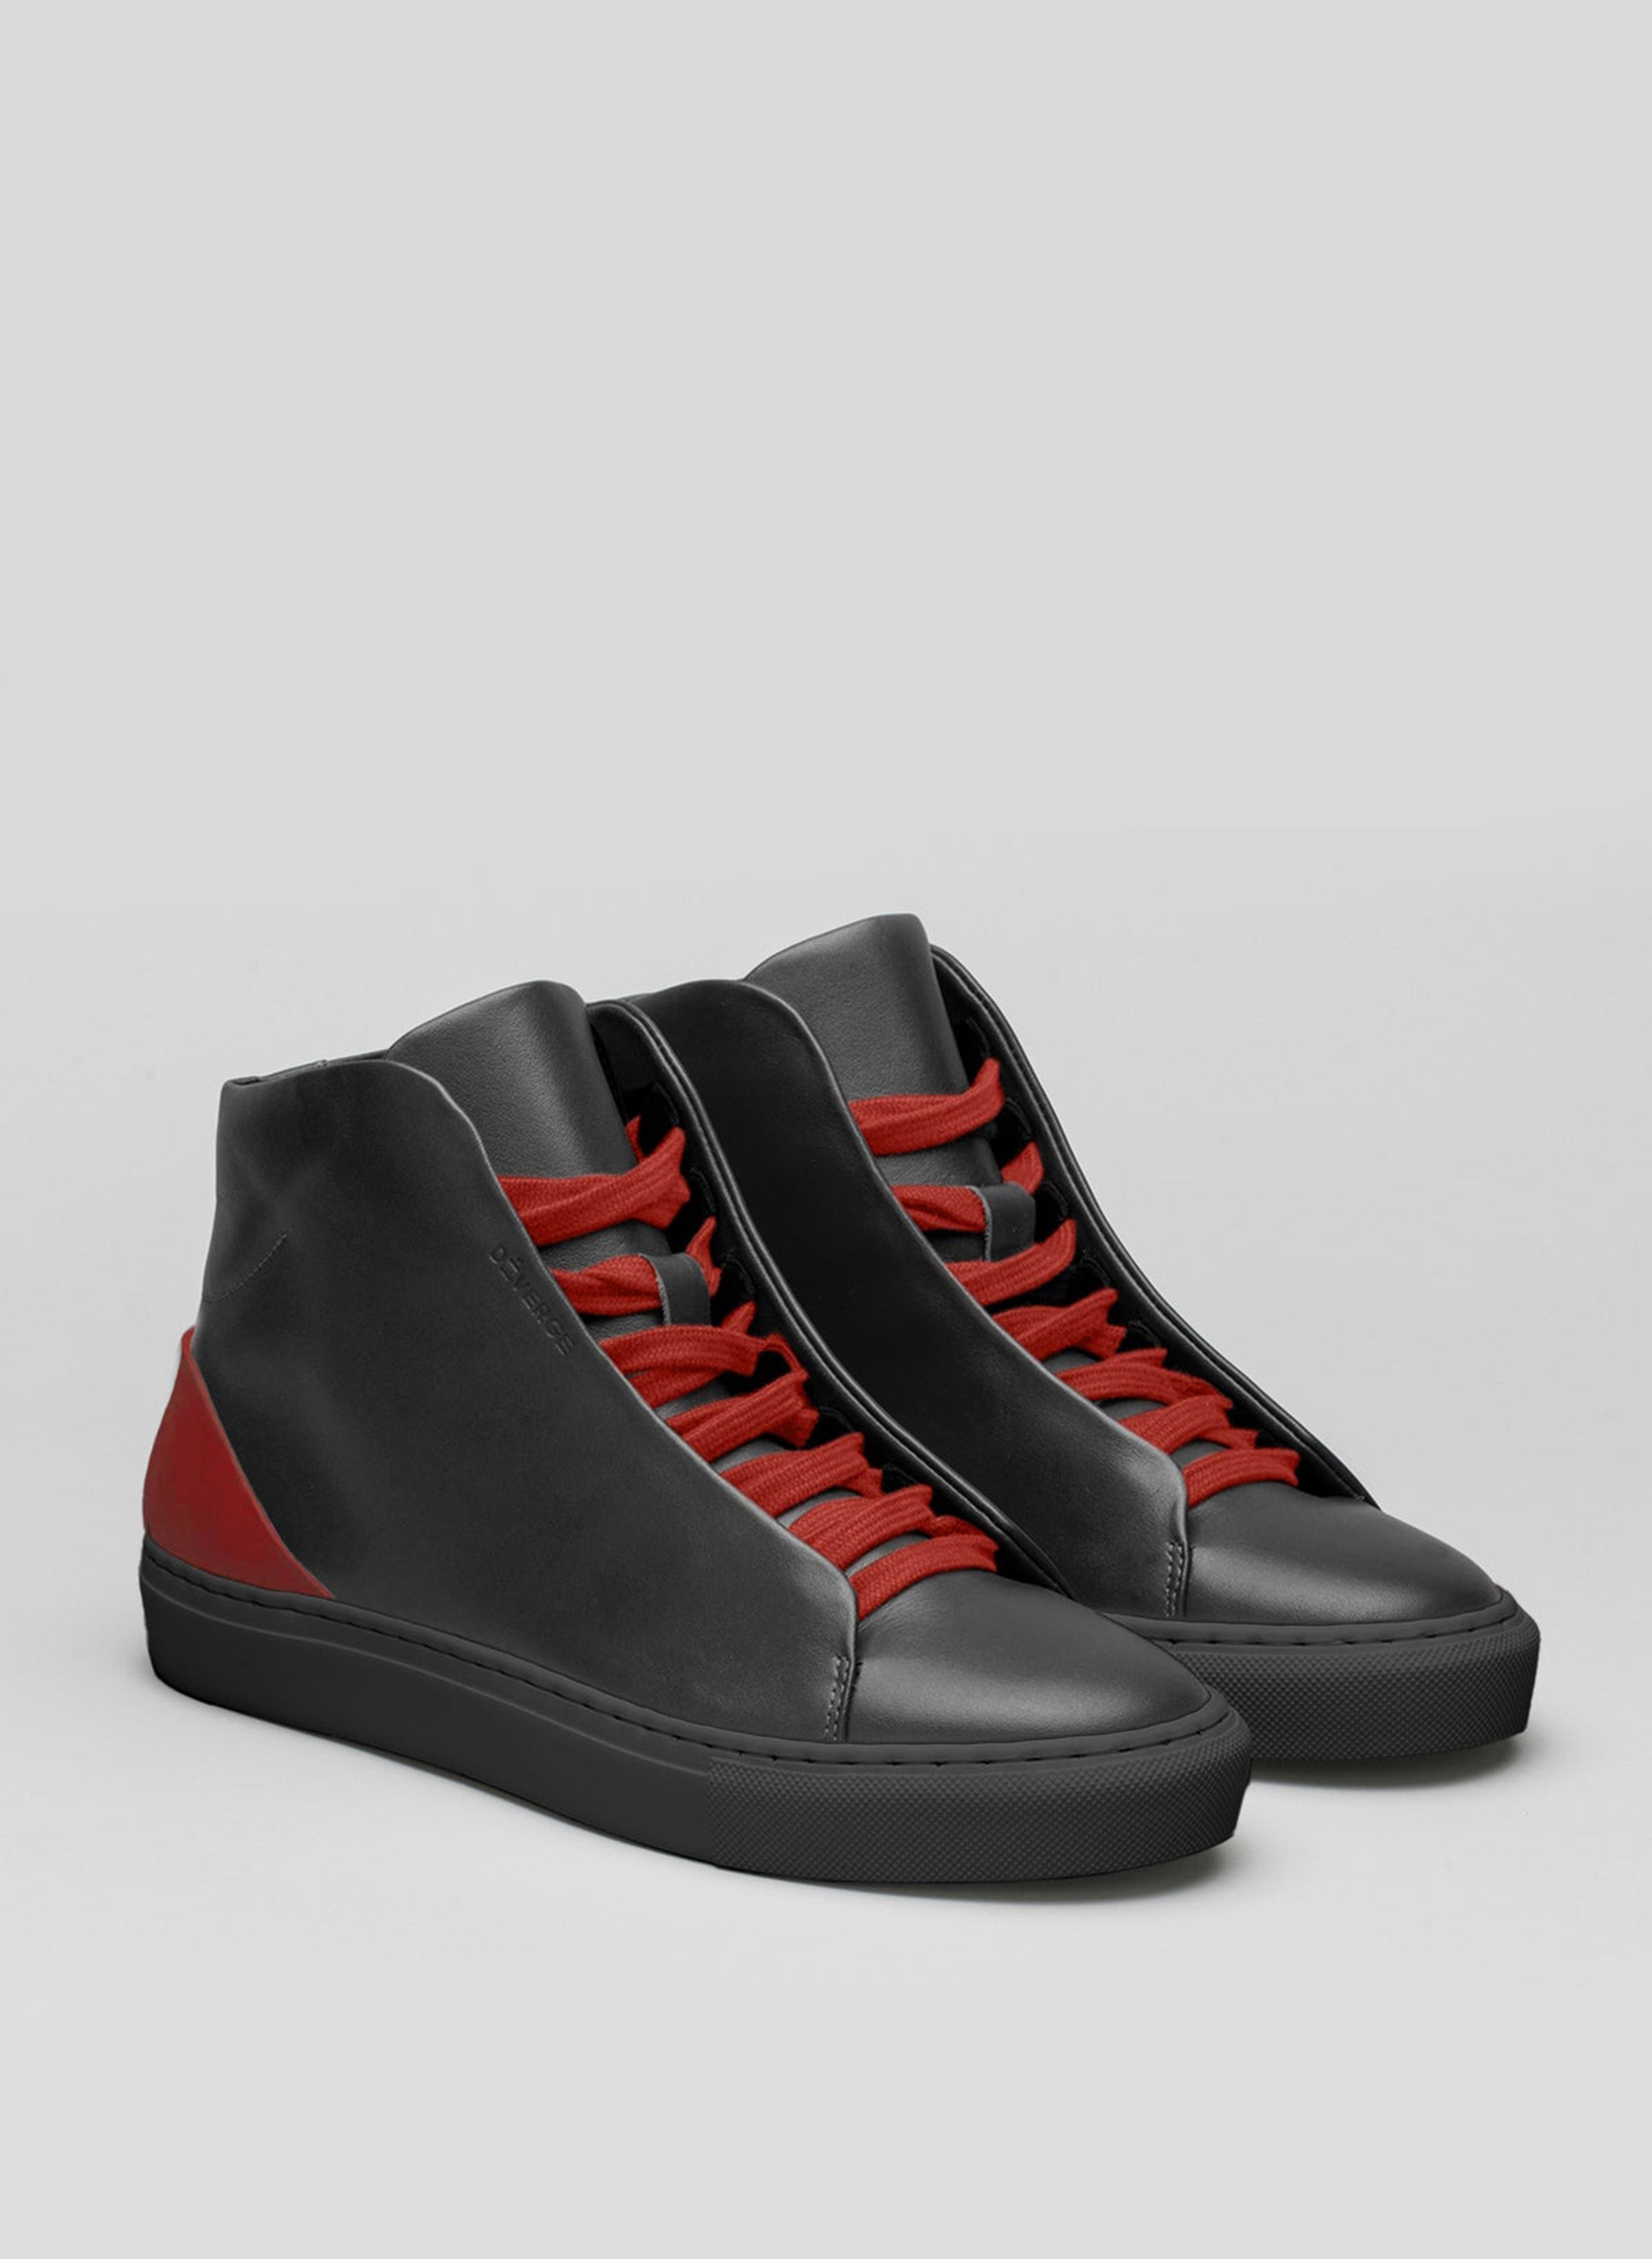 A pair of black high top sneakers with red laces, showcasing custom shoes by Diverge.